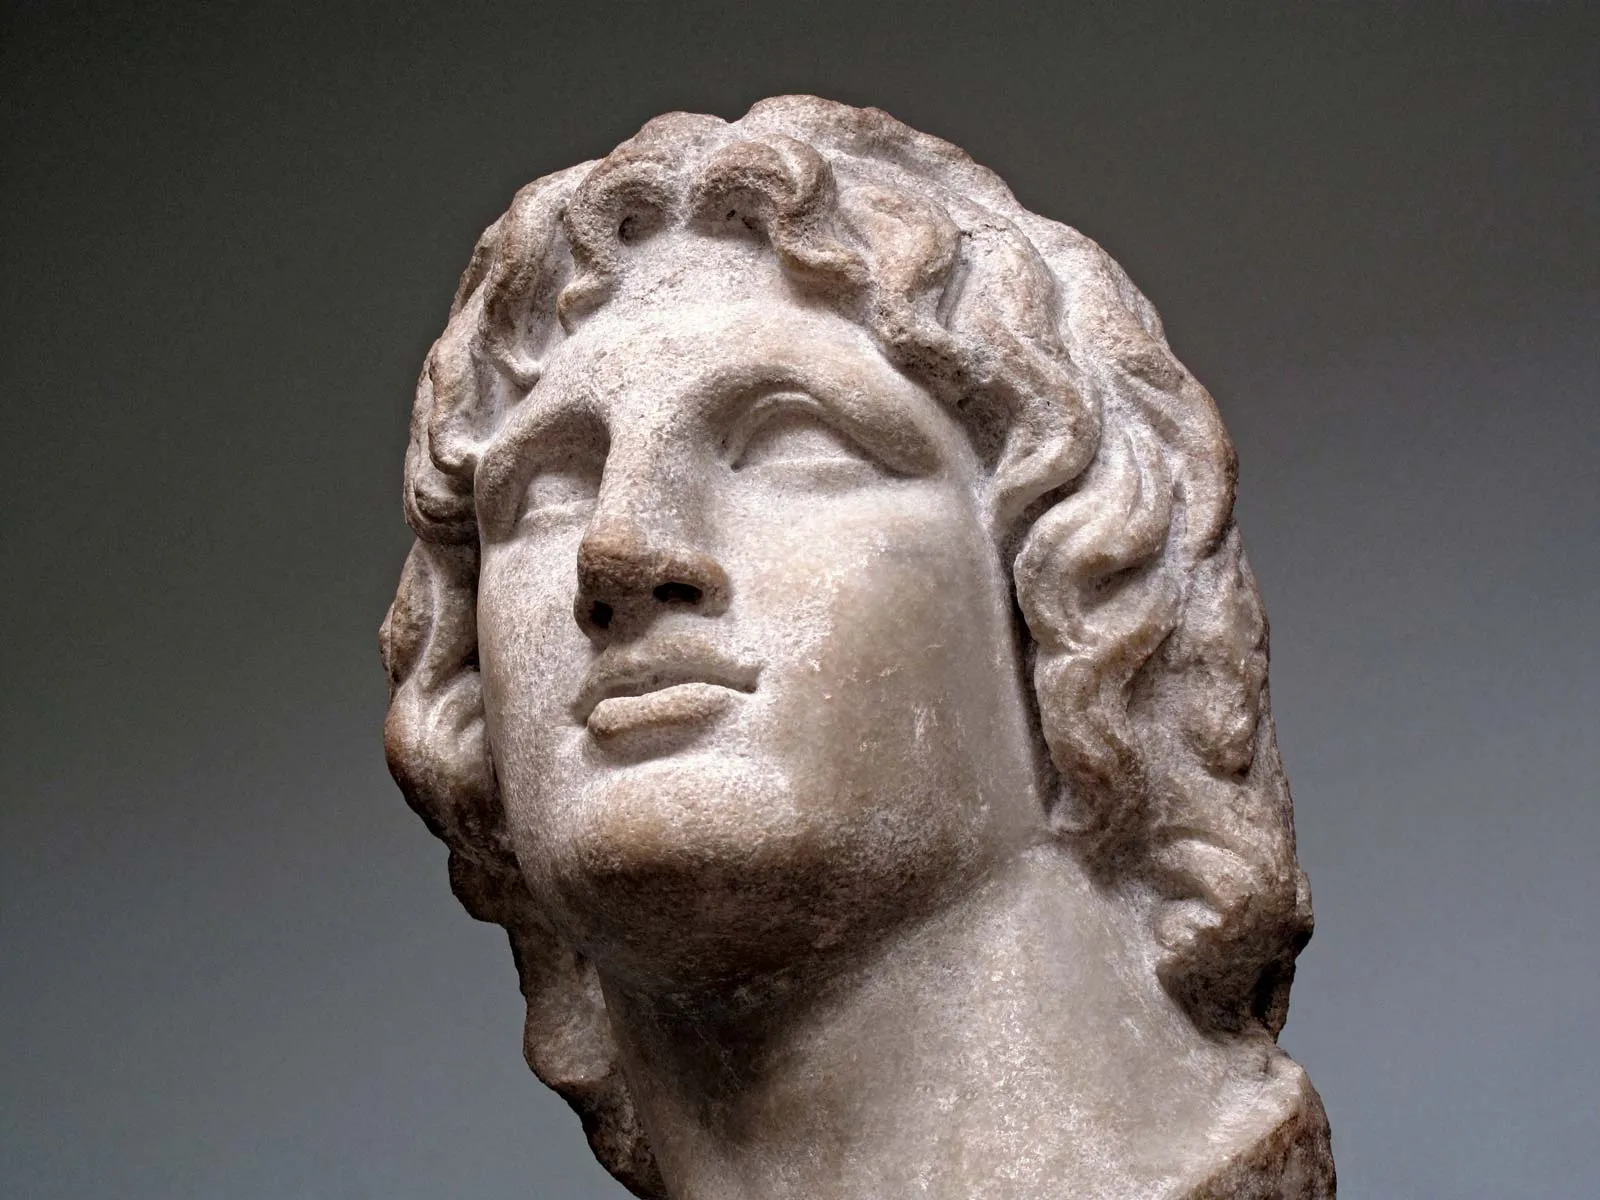 Biography of Alexander the Great